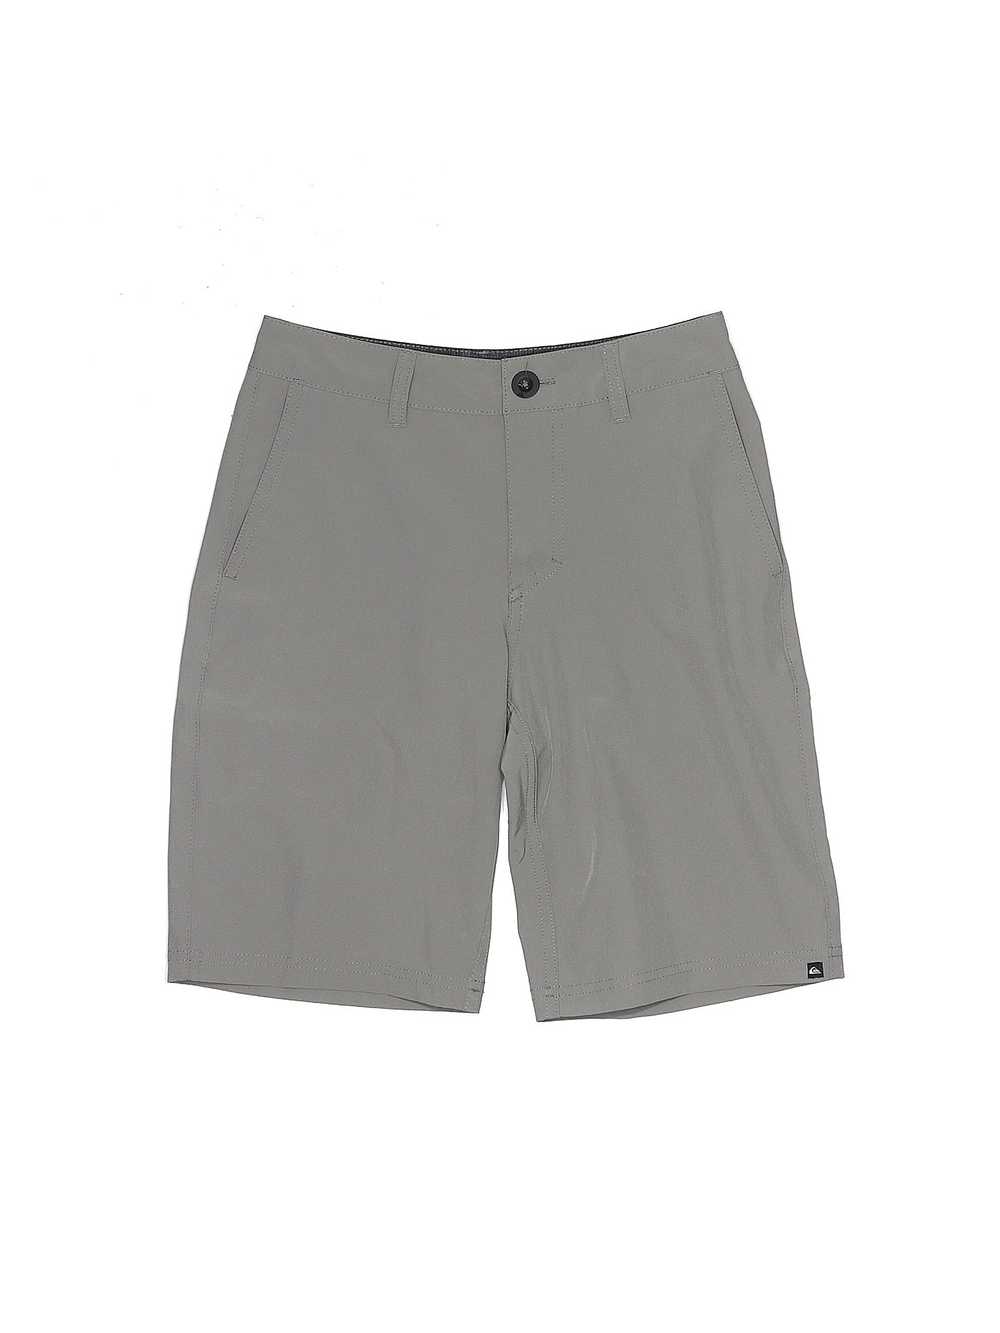 Quiksilver Women Gray Athletic Shorts 25W - image 1